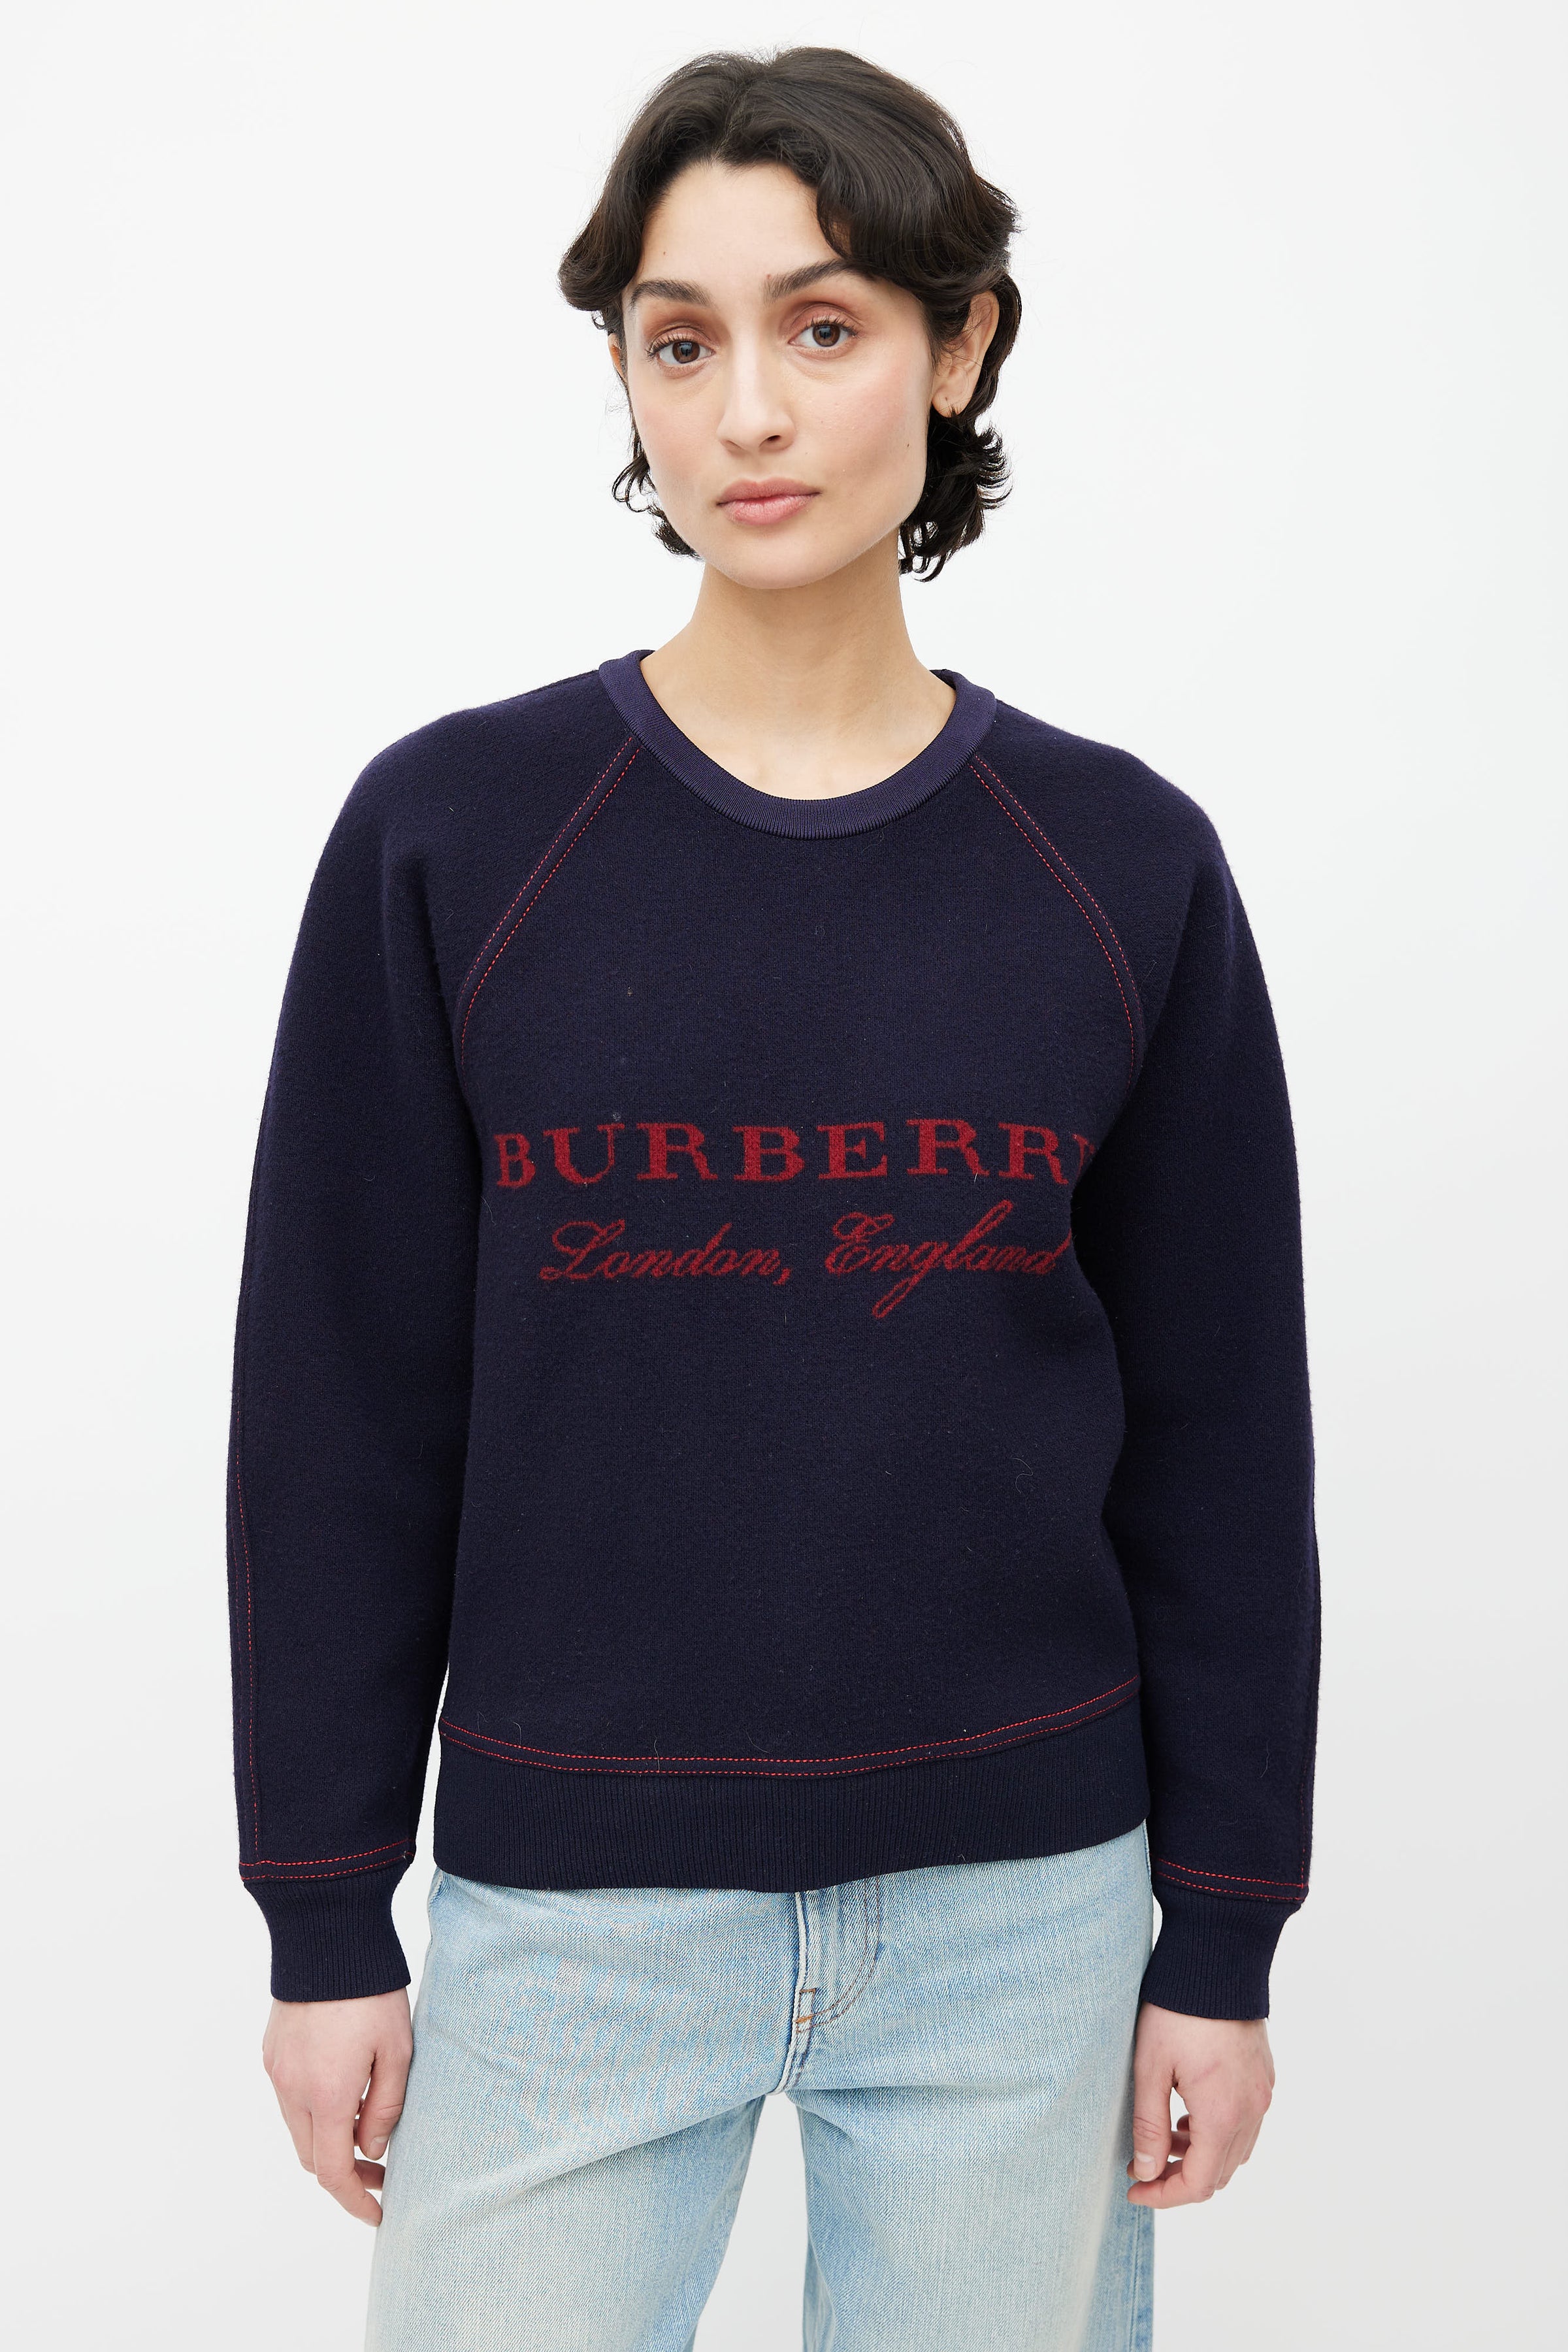 Burberry Elbow Patch Cashmere Sweater in Natural for Men